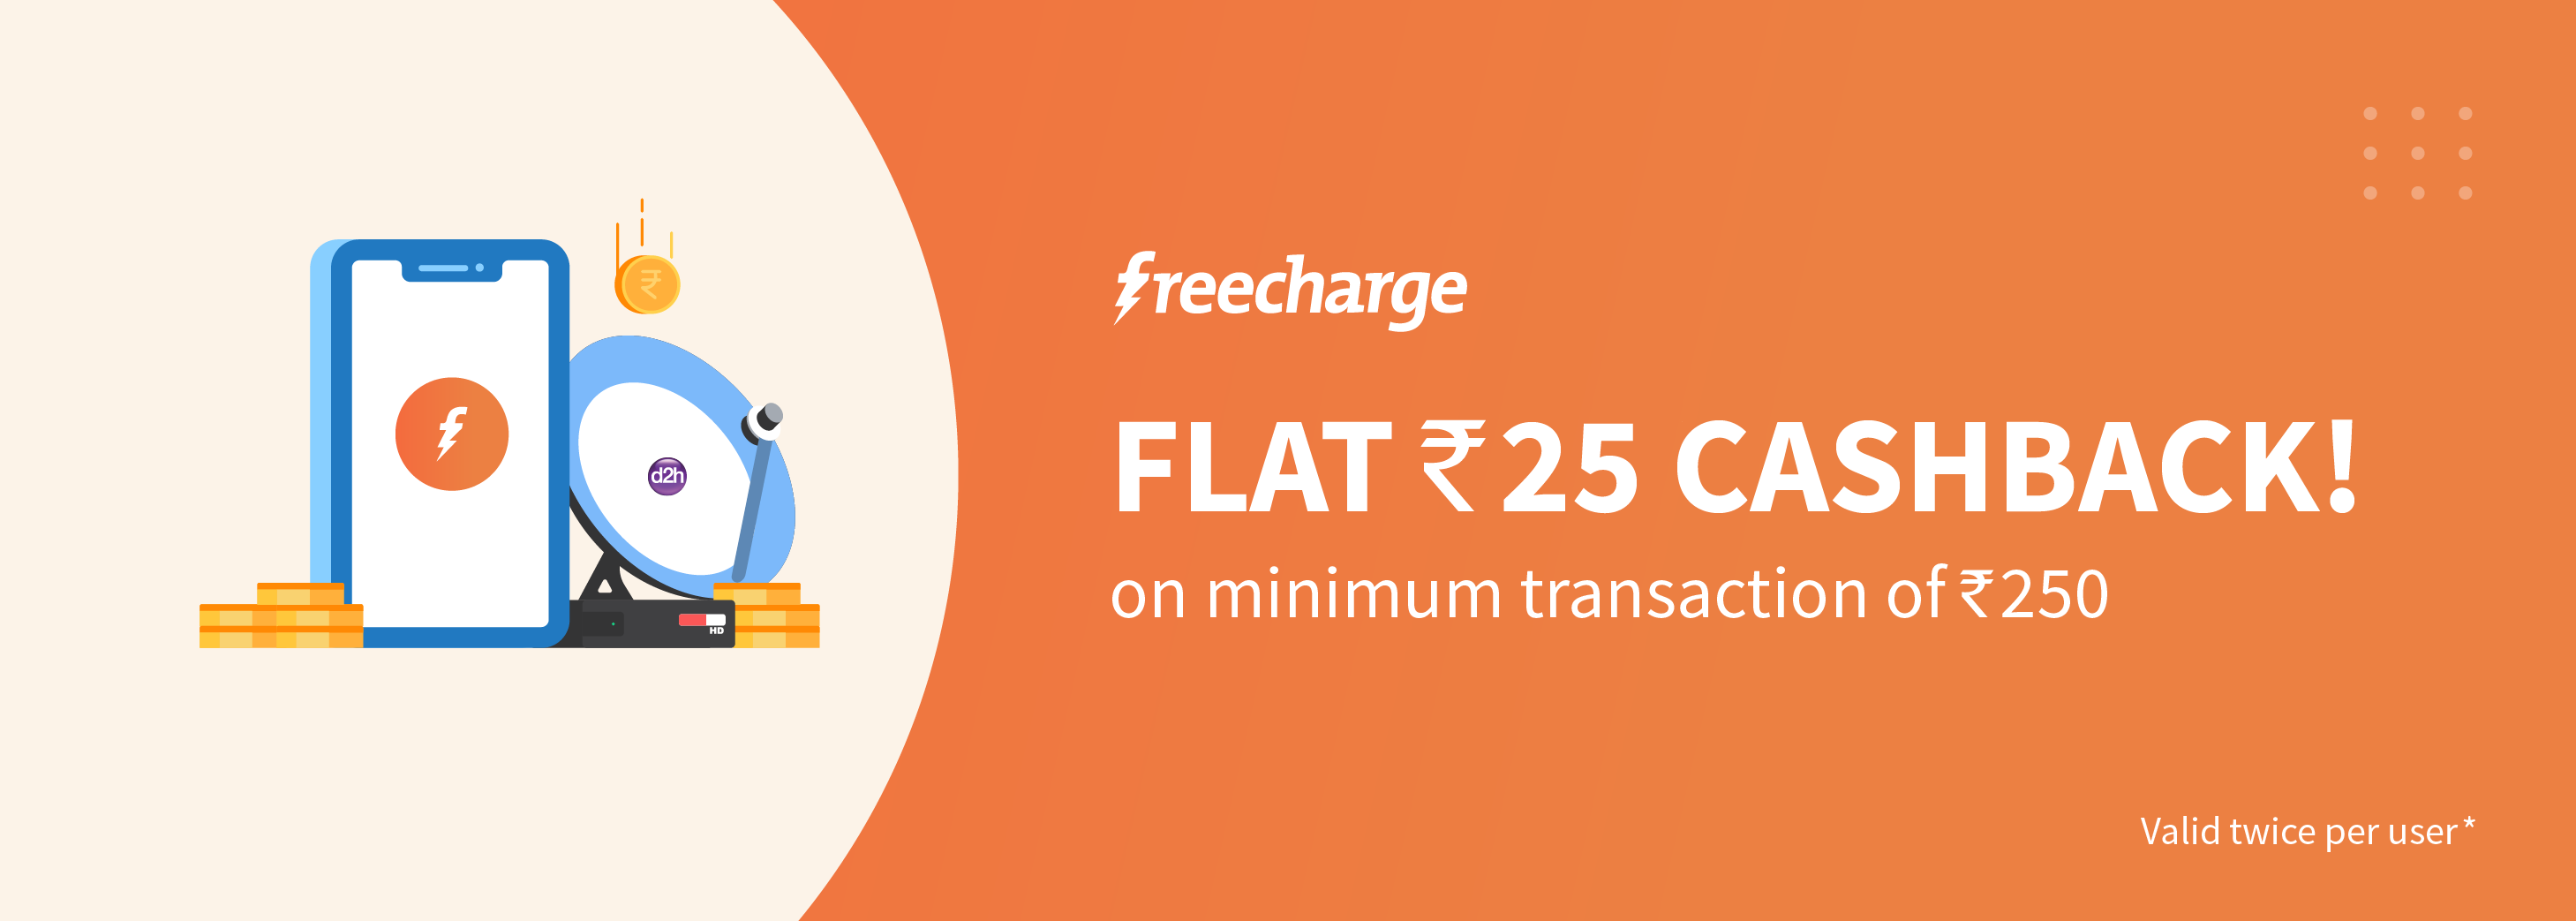 d2h FreeCharge Offer